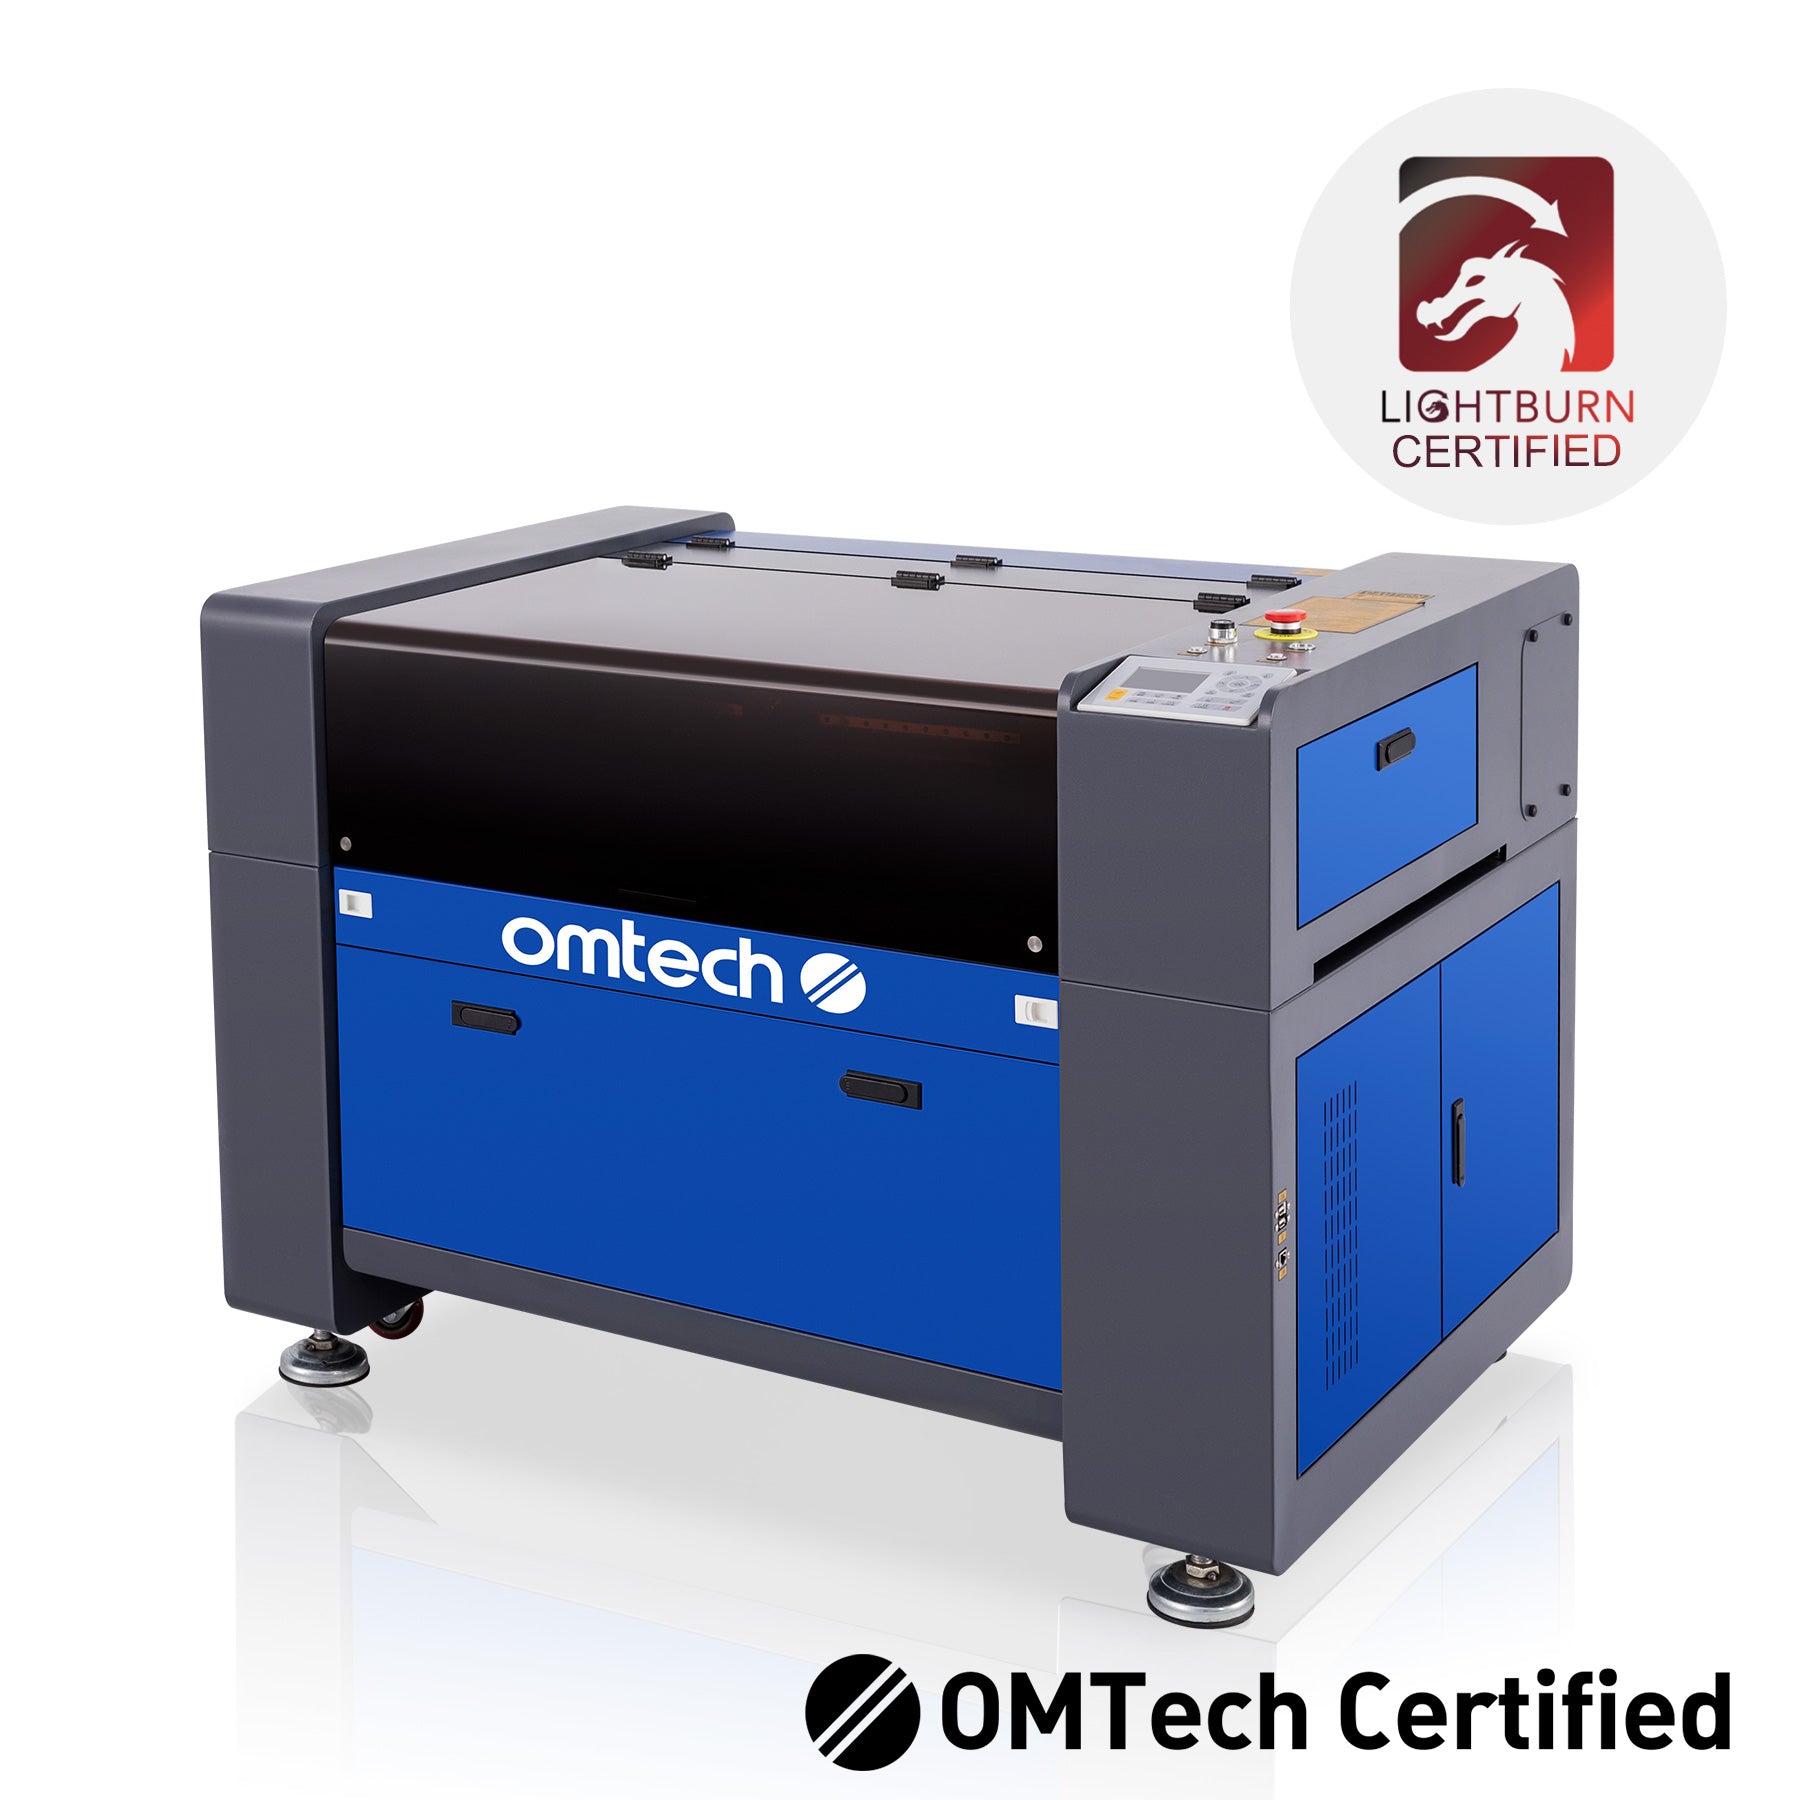 70W CO2 Laser Engraver - Pay as Low as $85/mo. - OMTech – OMTech Laser